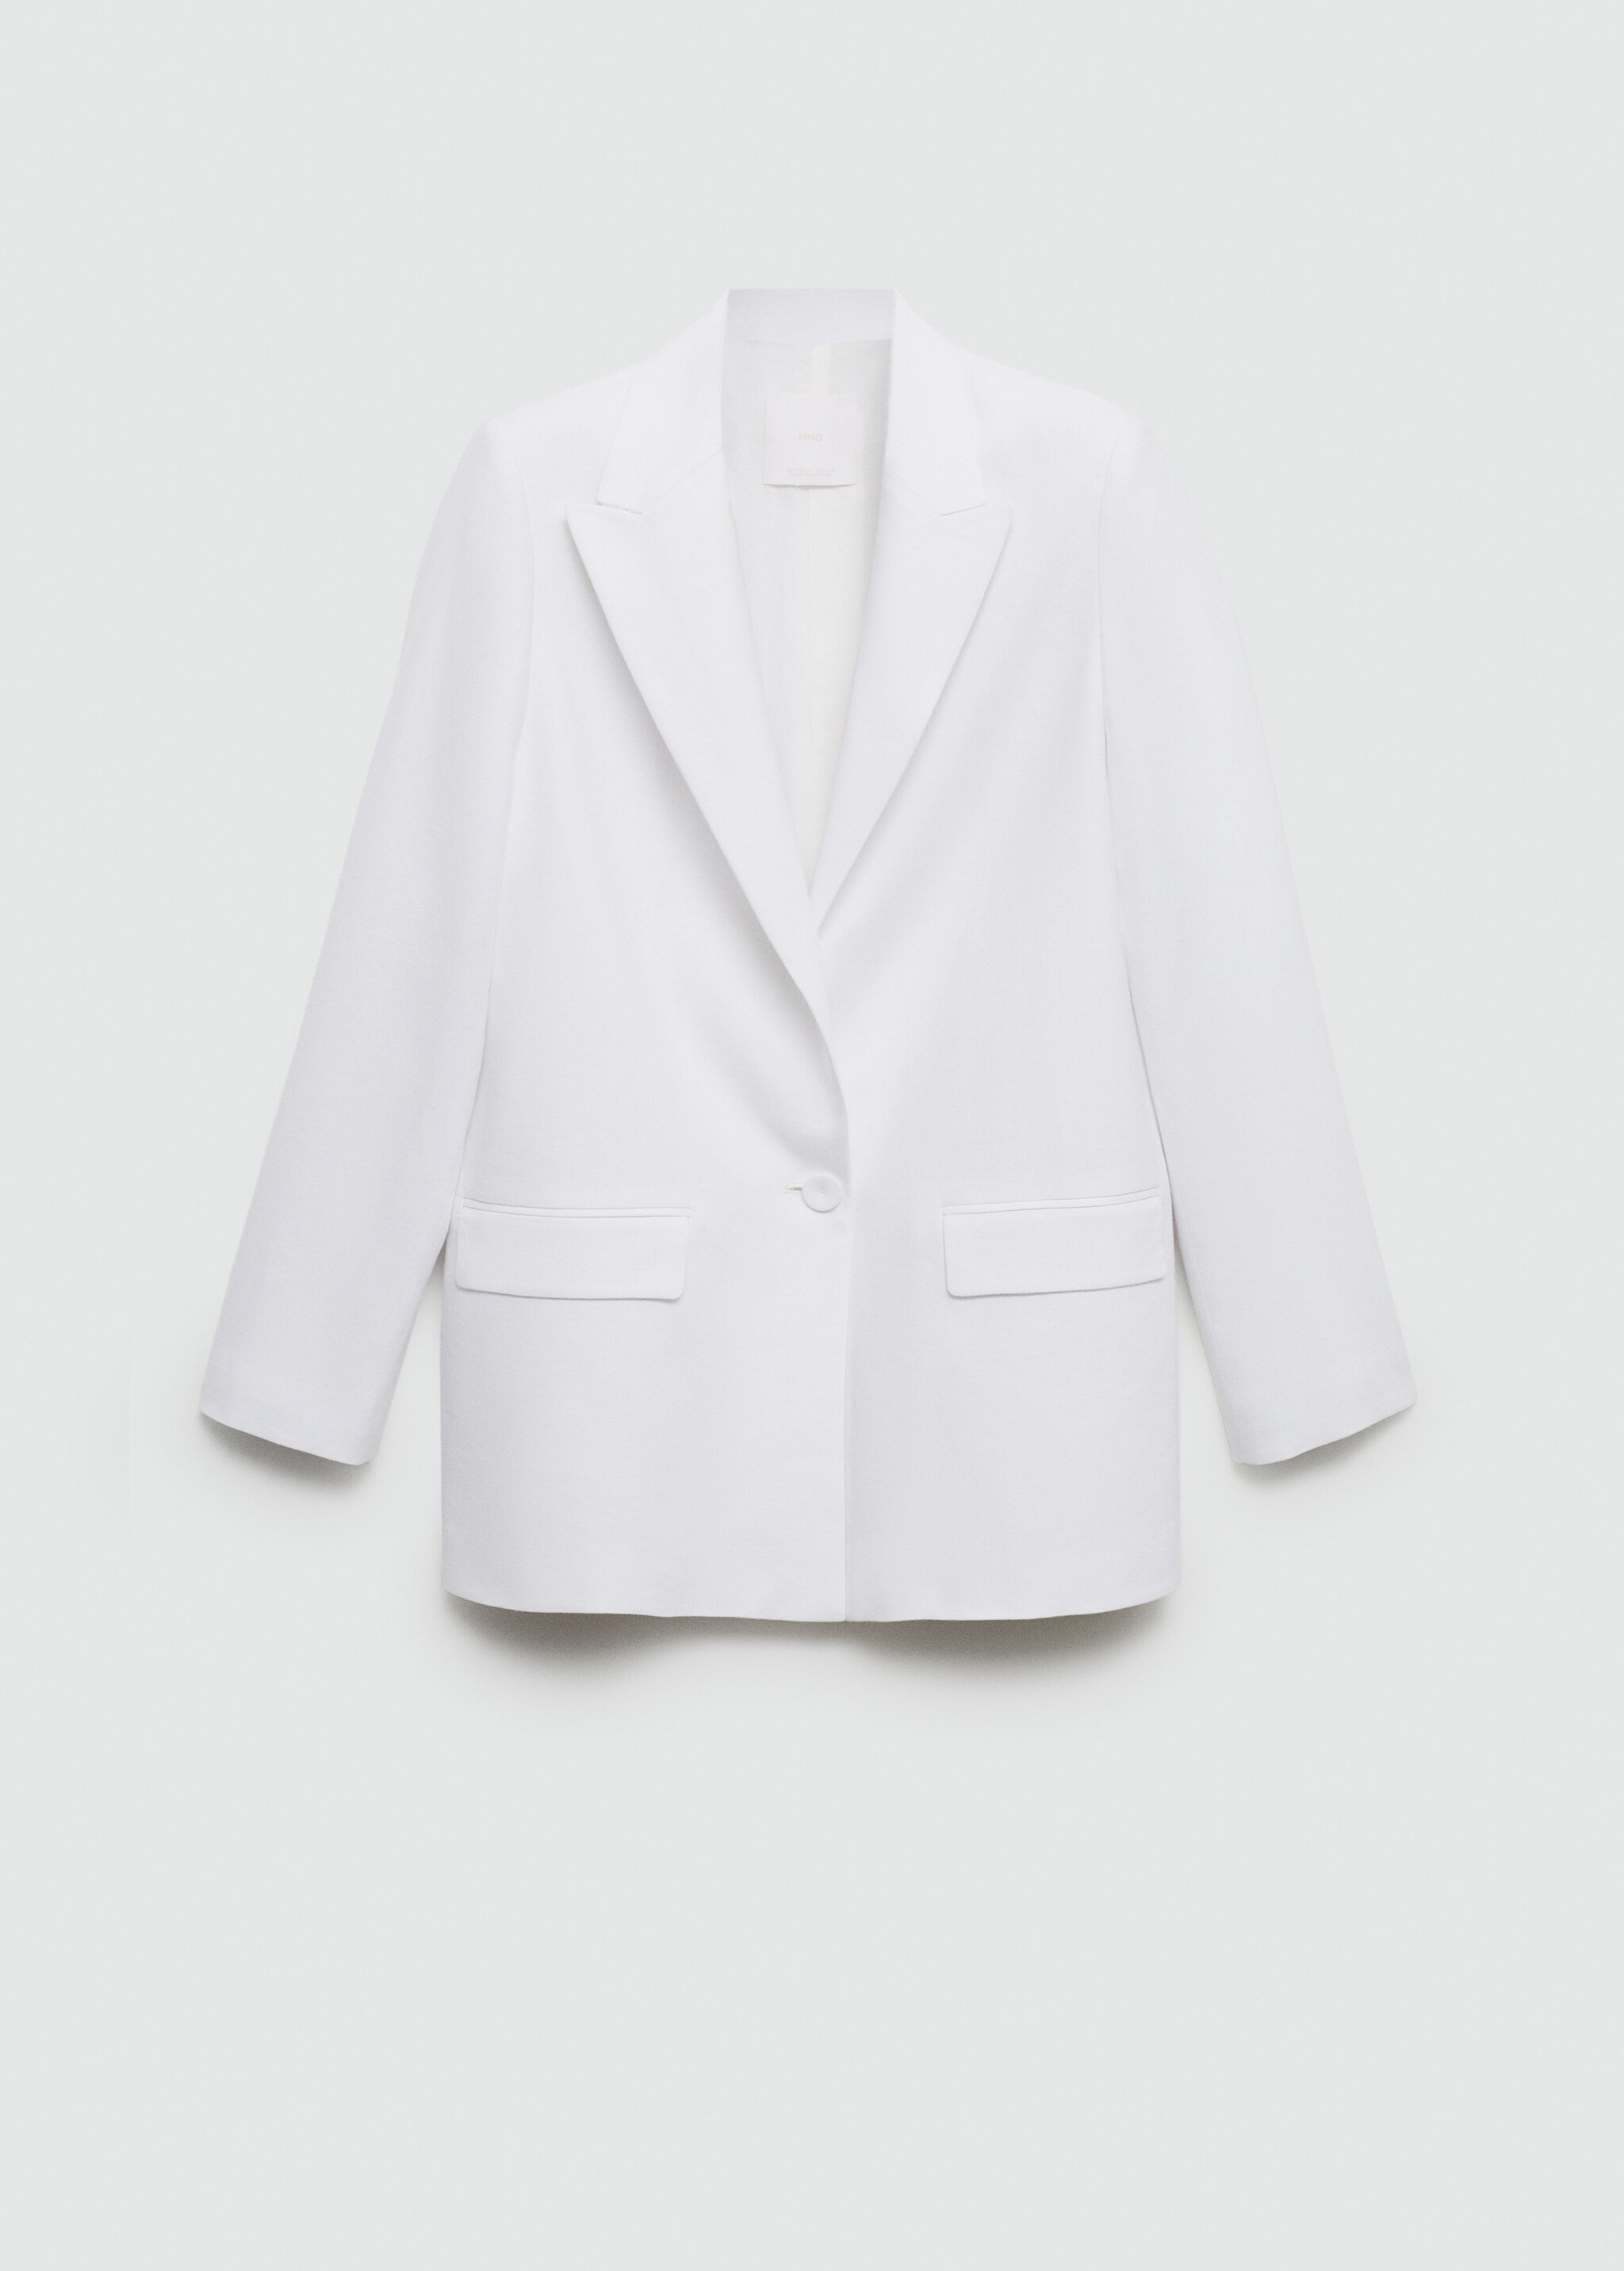 Straight linen blazer - Article without model